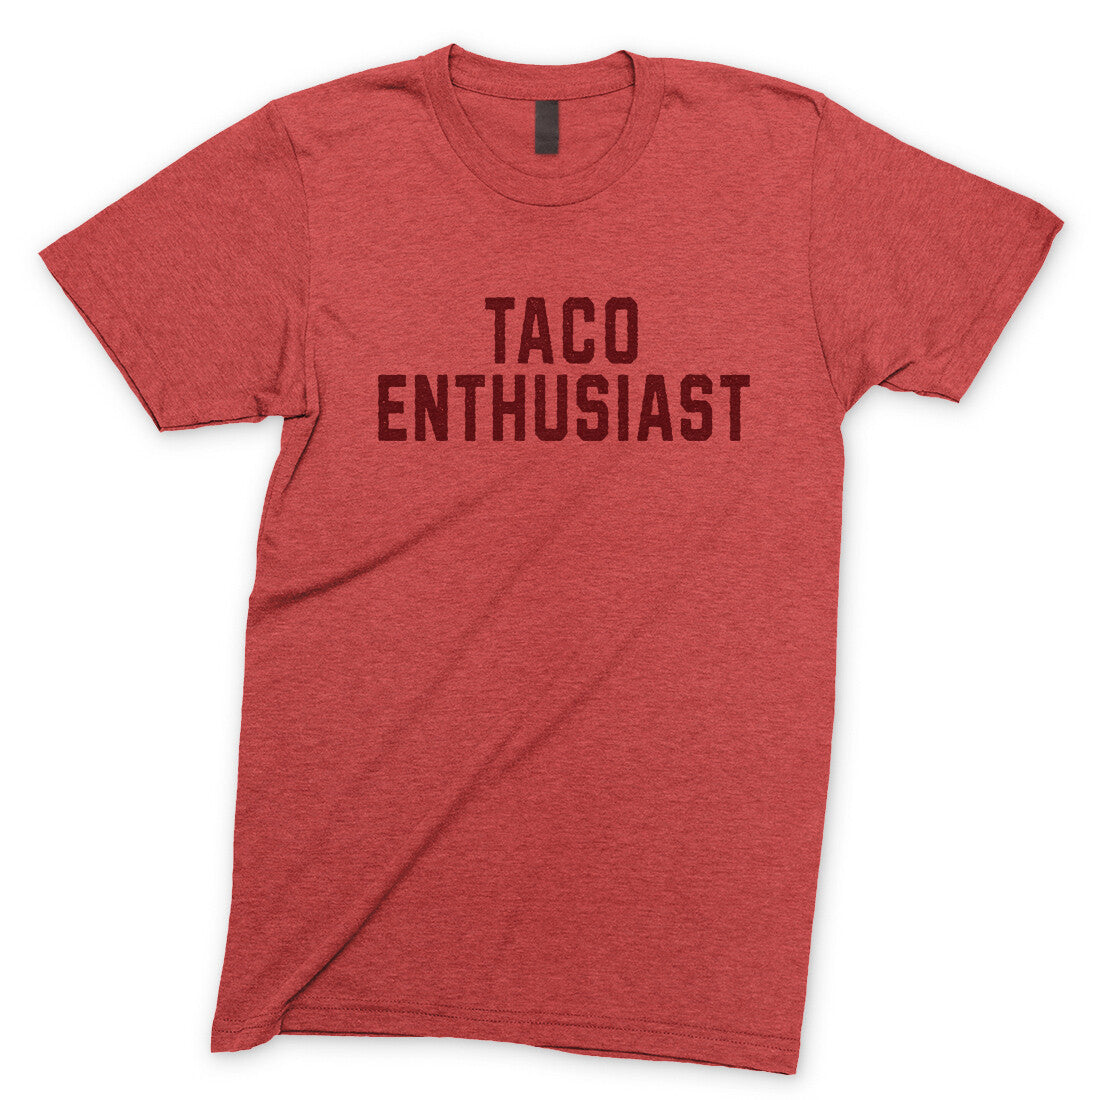 Taco Enthusiast in Heather Red Color